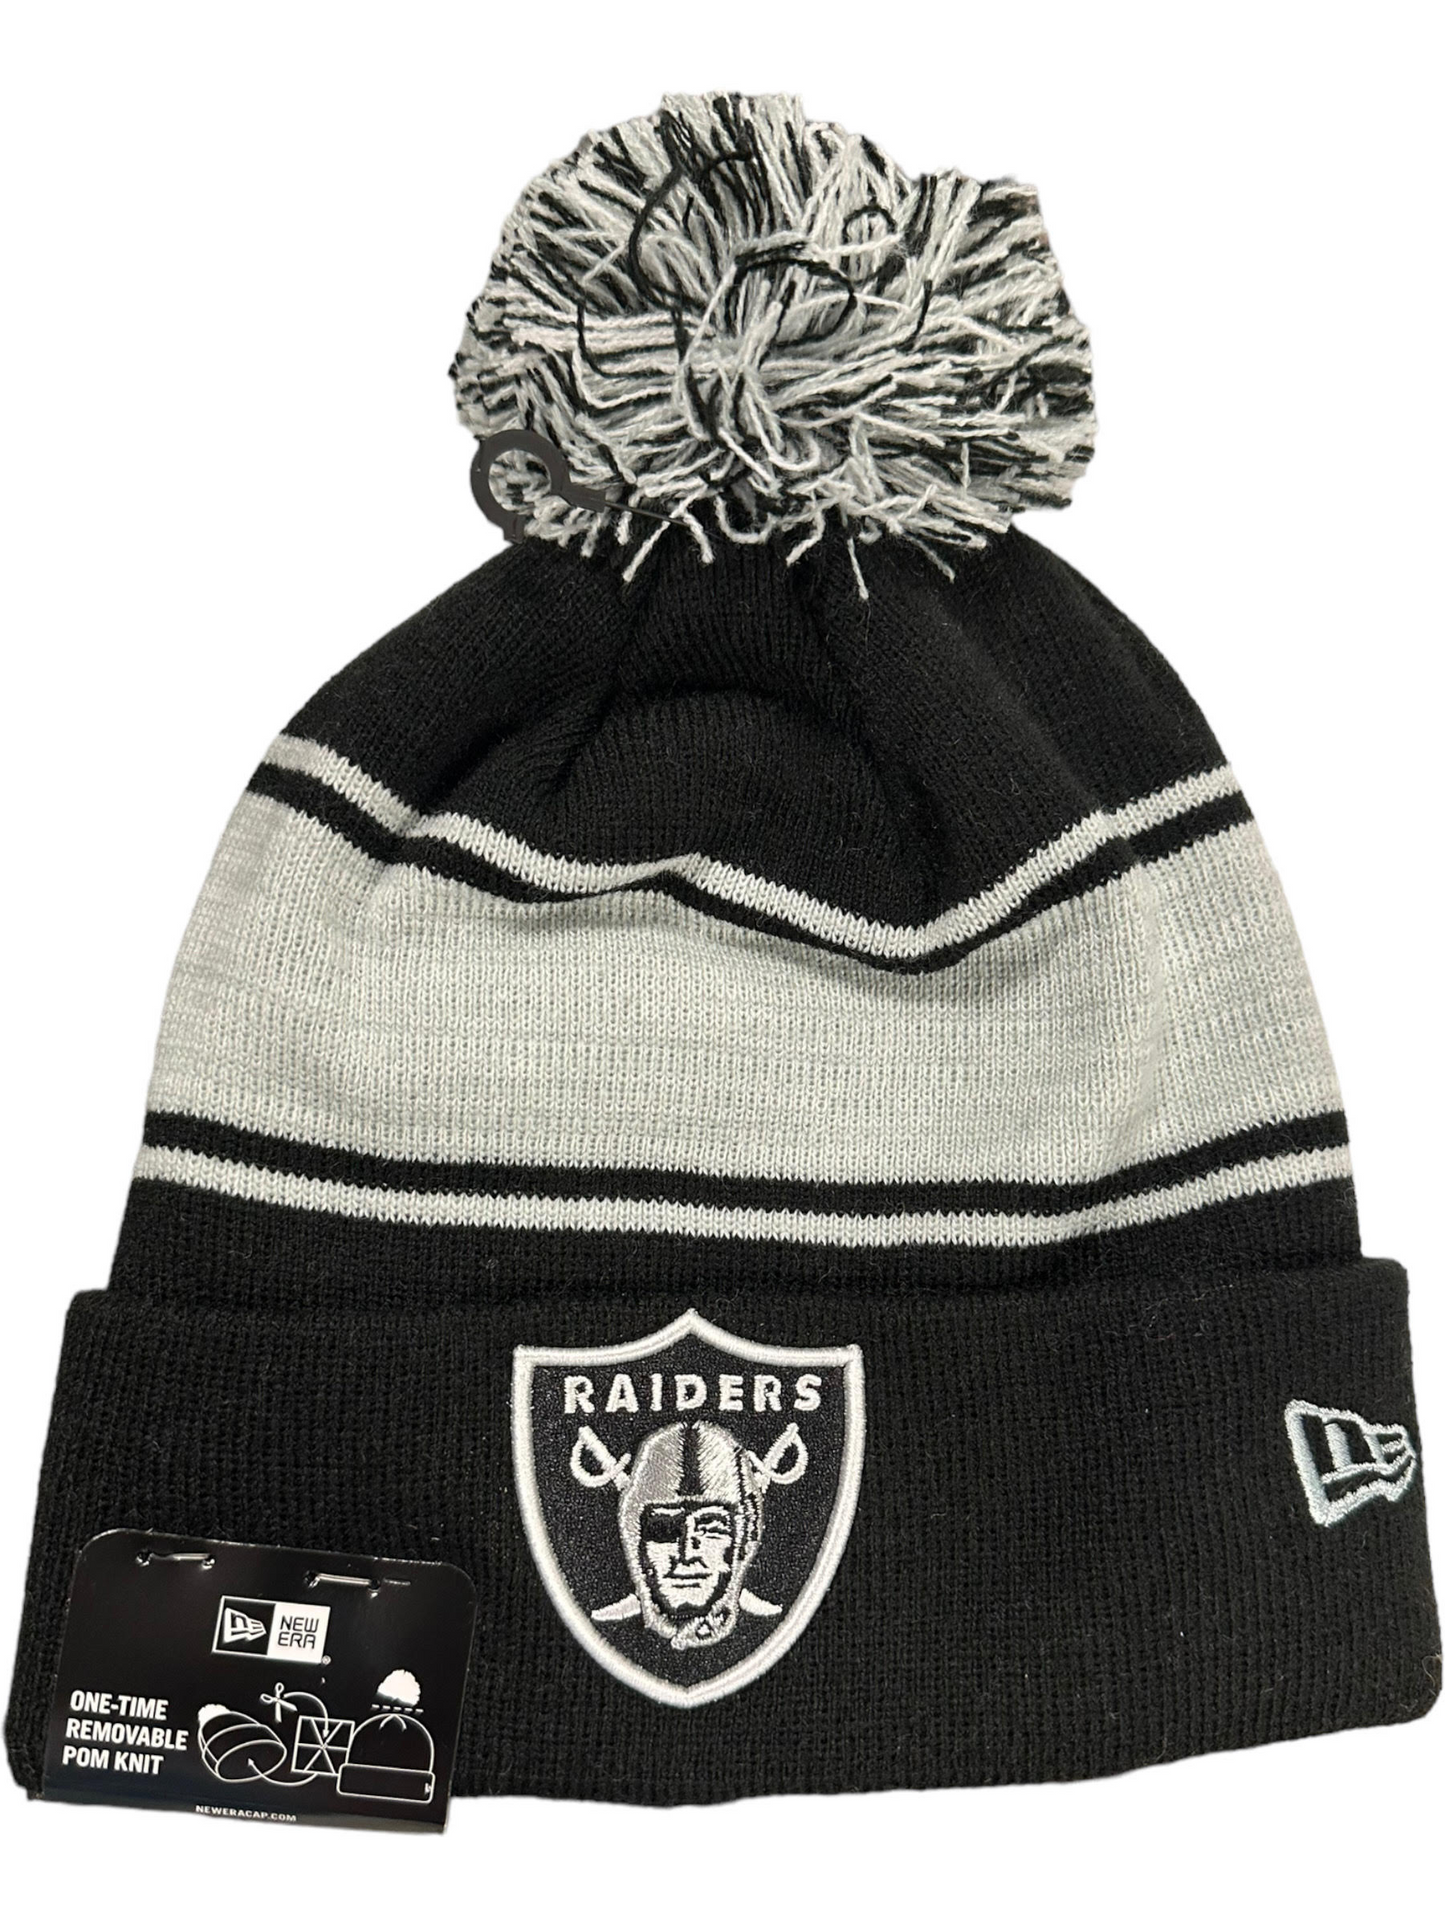 Super Bowl LV Youth Knit Beanie - Red